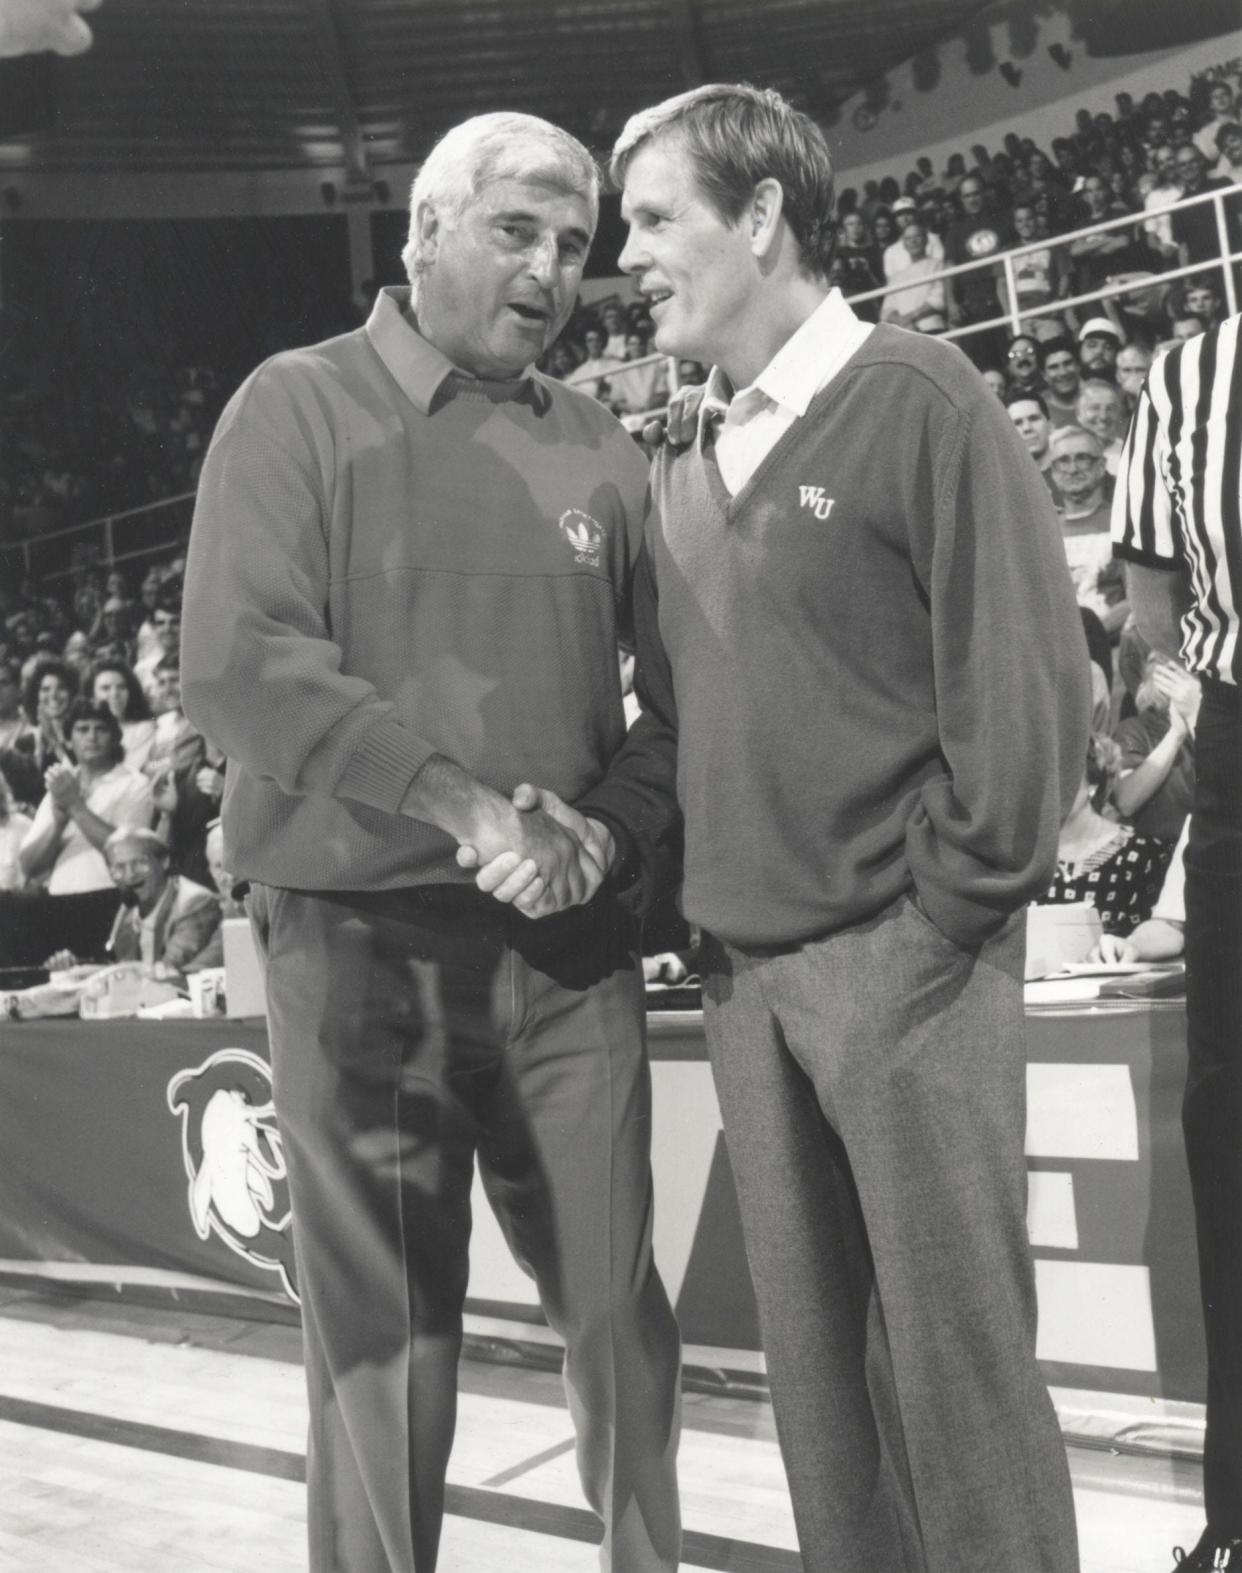 Competing coaches Pete Bell (Nick Nolte, right) and Bobby Knight (himself) shake hands in 